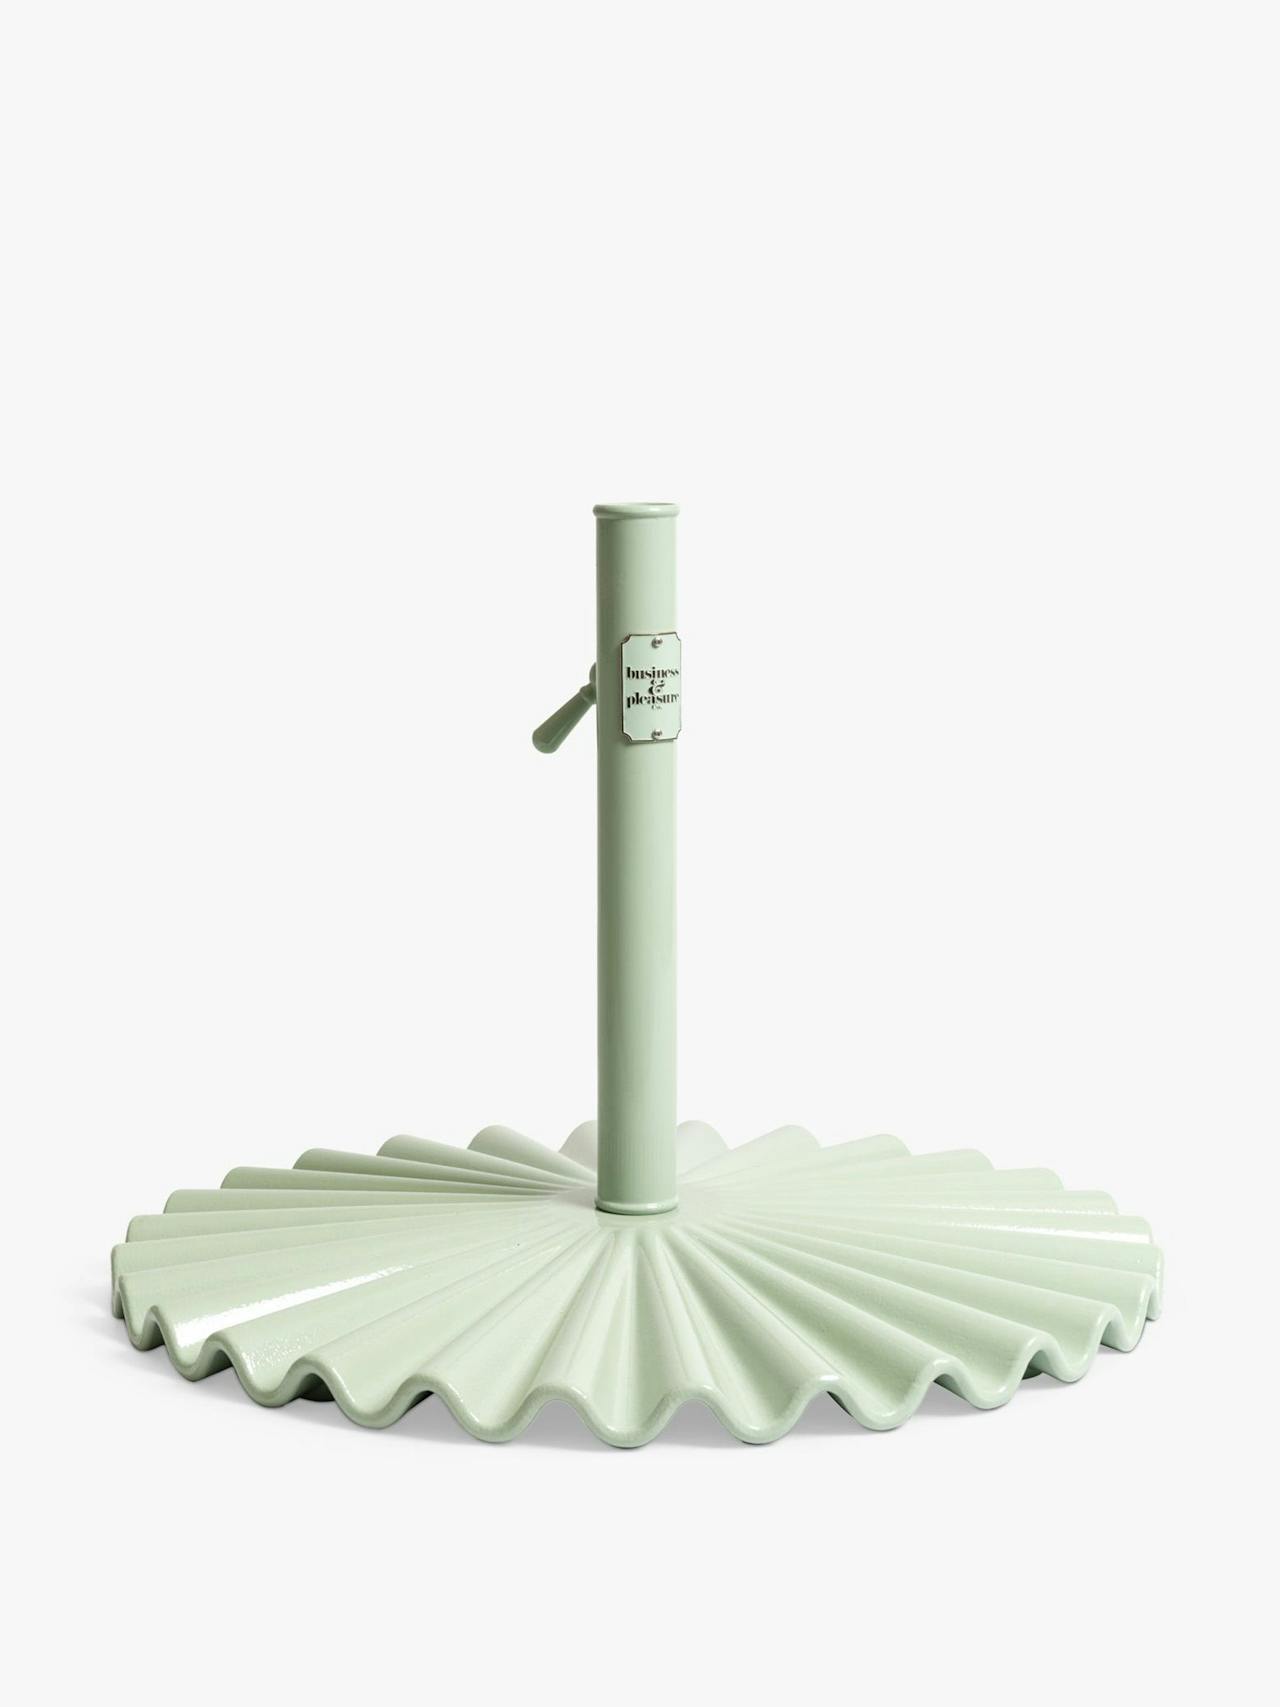 Clamshell parasol base weight